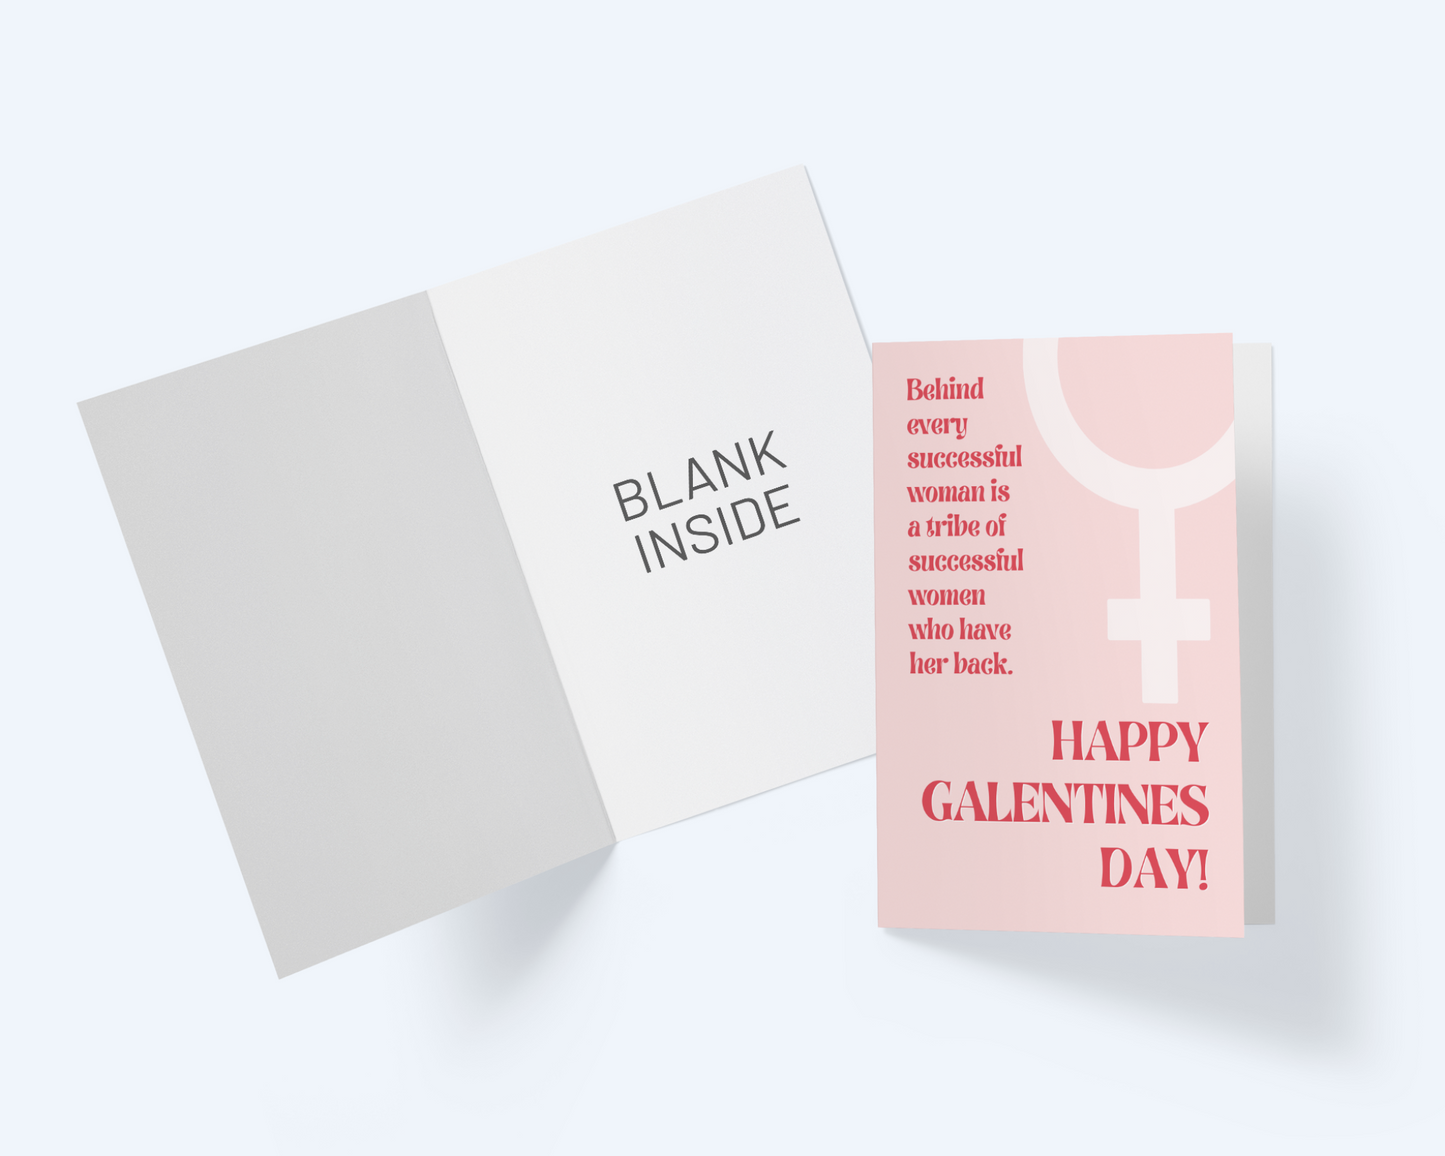 Galentine's Day - Behind Every Successful Woman Is Her Tribe Greeting Card.